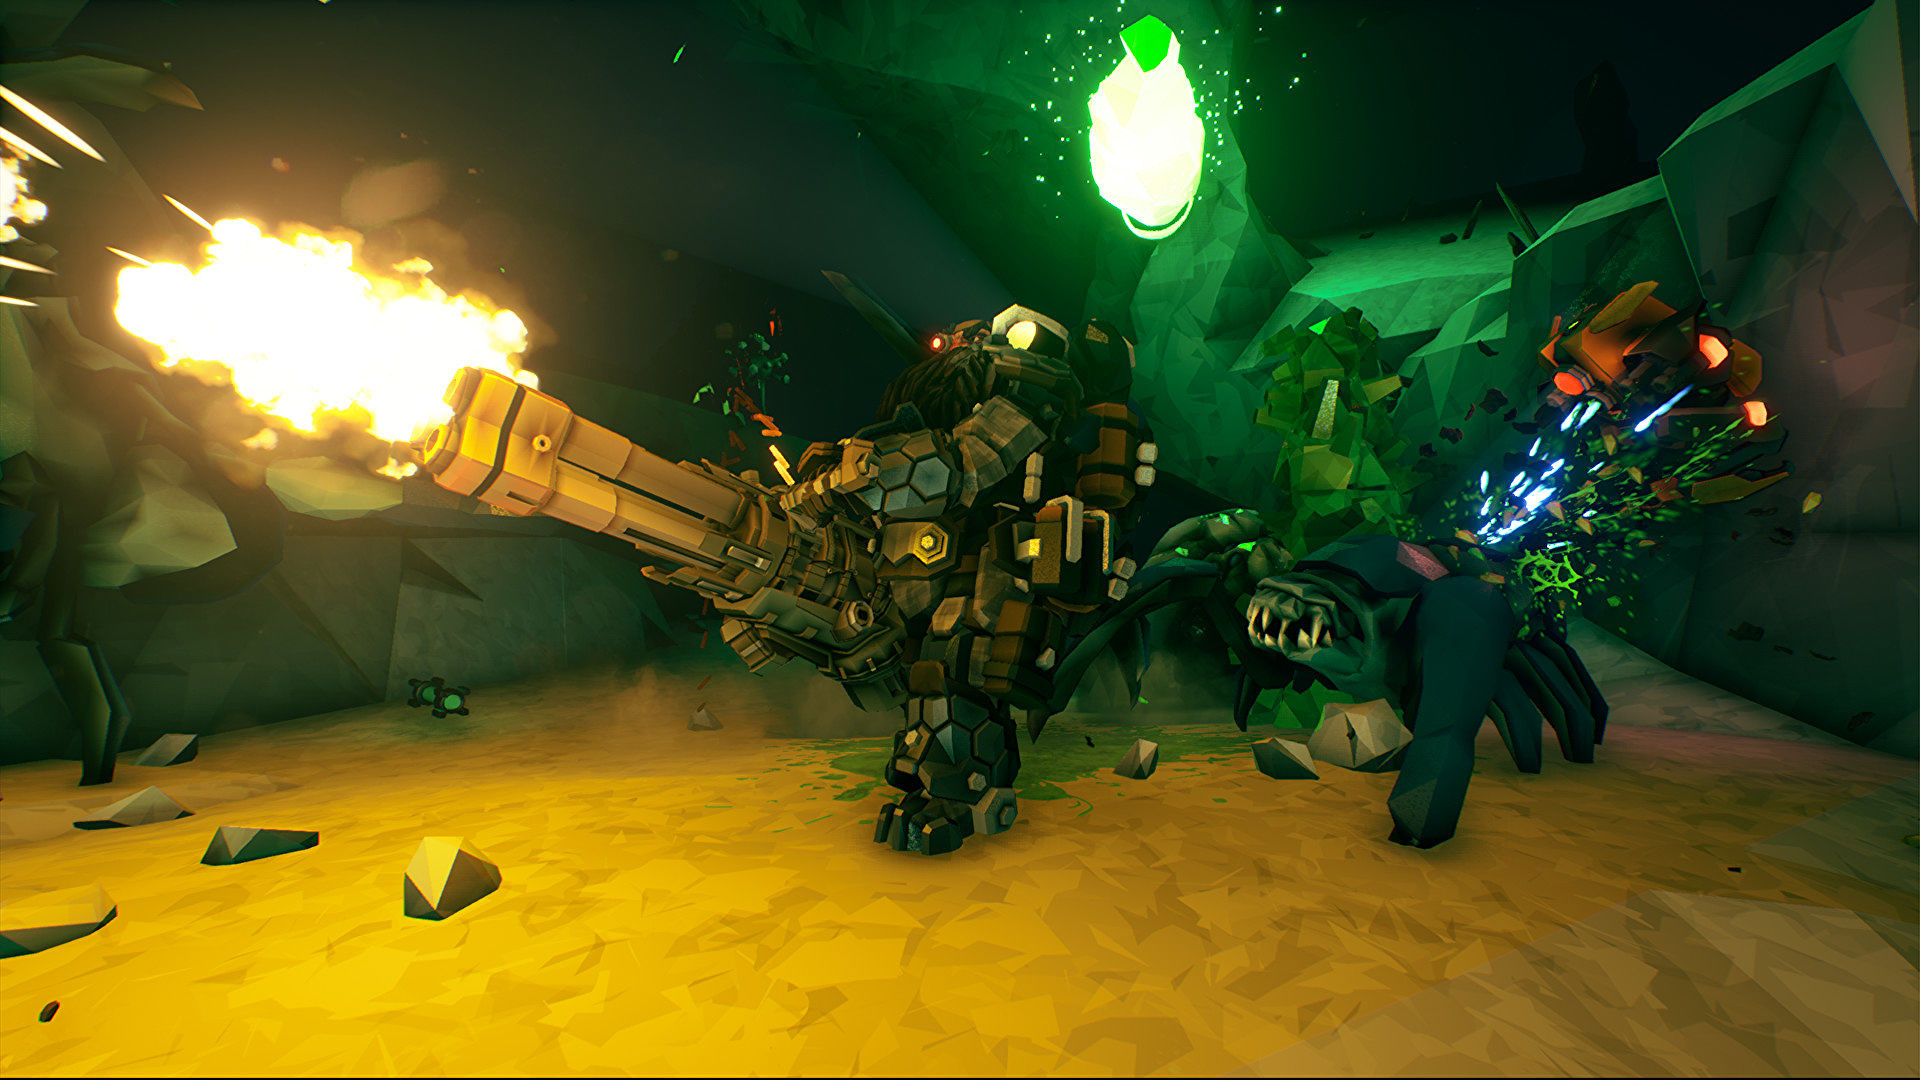 Deep Rock Galactic: A 4-player sci-fi co-op shooter taking place in Hoxxes IV. 1920x1080 Full HD Wallpaper.